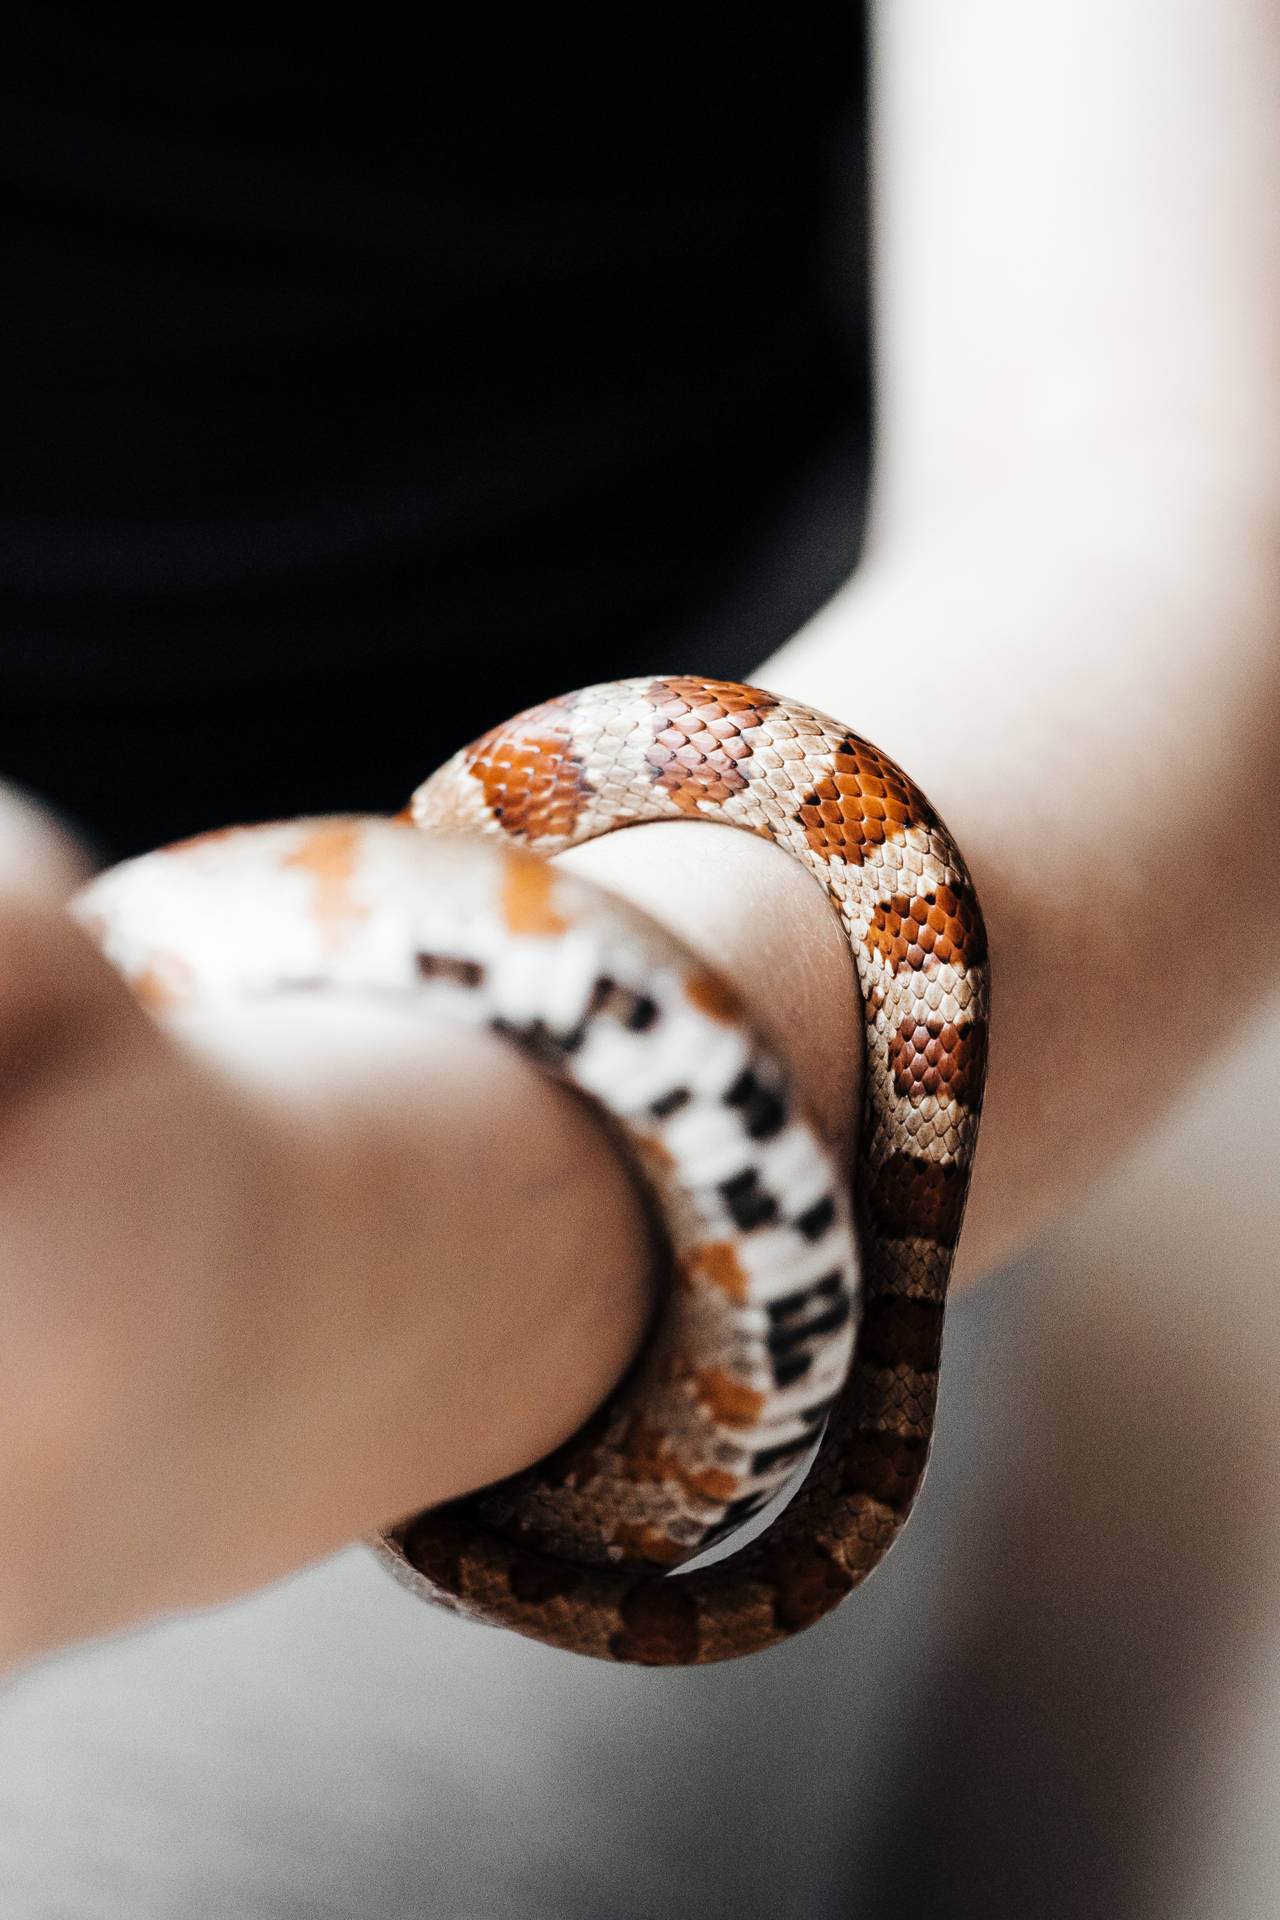 Snakes Wrapping Arm Awesome Animal Background